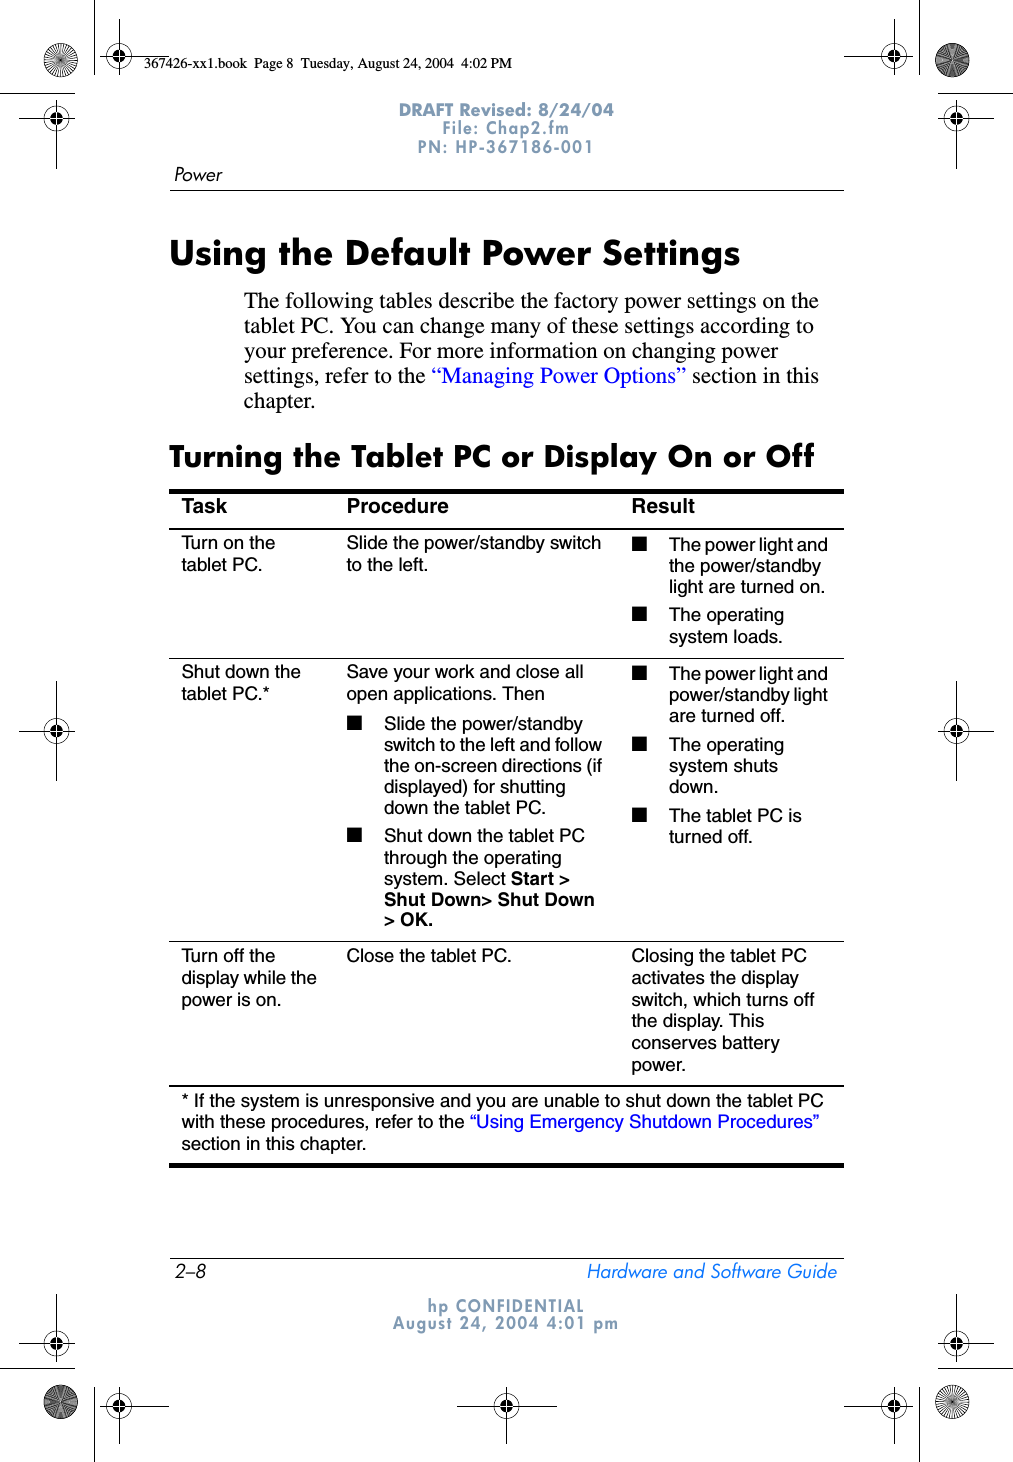 2–8 Hardware and Software GuidePowerDRAFT Revised: 8/24/04File: Chap2.fm PN: HP-367186-001 hp CONFIDENTIALAugust 24, 2004 4:01 pmUsing the Default Power SettingsThe following tables describe the factory power settings on the tablet PC. You can change many of these settings according to your preference. For more information on changing power settings, refer to the “Managing Power Options” section in this chapter.Turning the Tablet PC or Display On or OffTask Procedure ResultTurn on the tablet PC.Slide the power/standby switch to the left.■The power light and the power/standby light are turned on.■The operating system loads.Shut down the tablet PC.*Save your work and close all open applications. Then■Slide the power/standby switch to the left and follow the on-screen directions (if displayed) for shutting down the tablet PC.■Shut down the tablet PC through the operating system. Select Start &gt; Shut Down&gt; Shut Down &gt; OK.■The power light and power/standby light are turned off.■The operating system shuts down.■The tablet PC is turned off.Turn off the display while the power is on.Close the tablet PC. Closing the tablet PC activates the display switch, which turns off the display. This conserves battery power.* If the system is unresponsive and you are unable to shut down the tablet PC with these procedures, refer to the “Using Emergency Shutdown Procedures” section in this chapter.367426-xx1.book  Page 8  Tuesday, August 24, 2004  4:02 PM